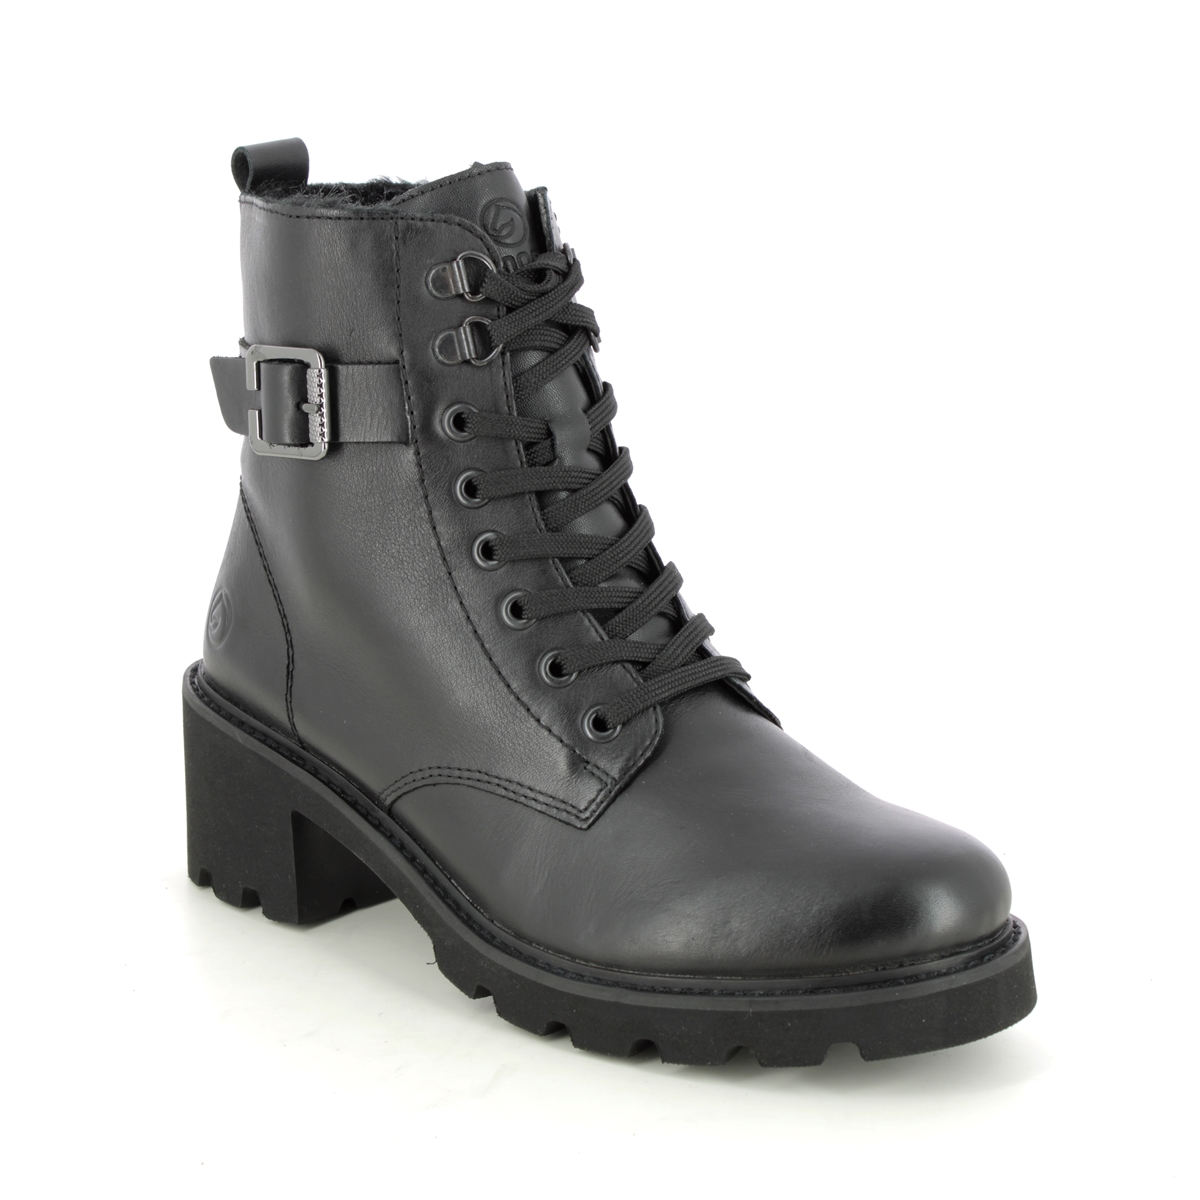 Remonte Bodola Black Leather Womens Lace Up Boots D0A74-01 In Size 42 In Plain Black Leather